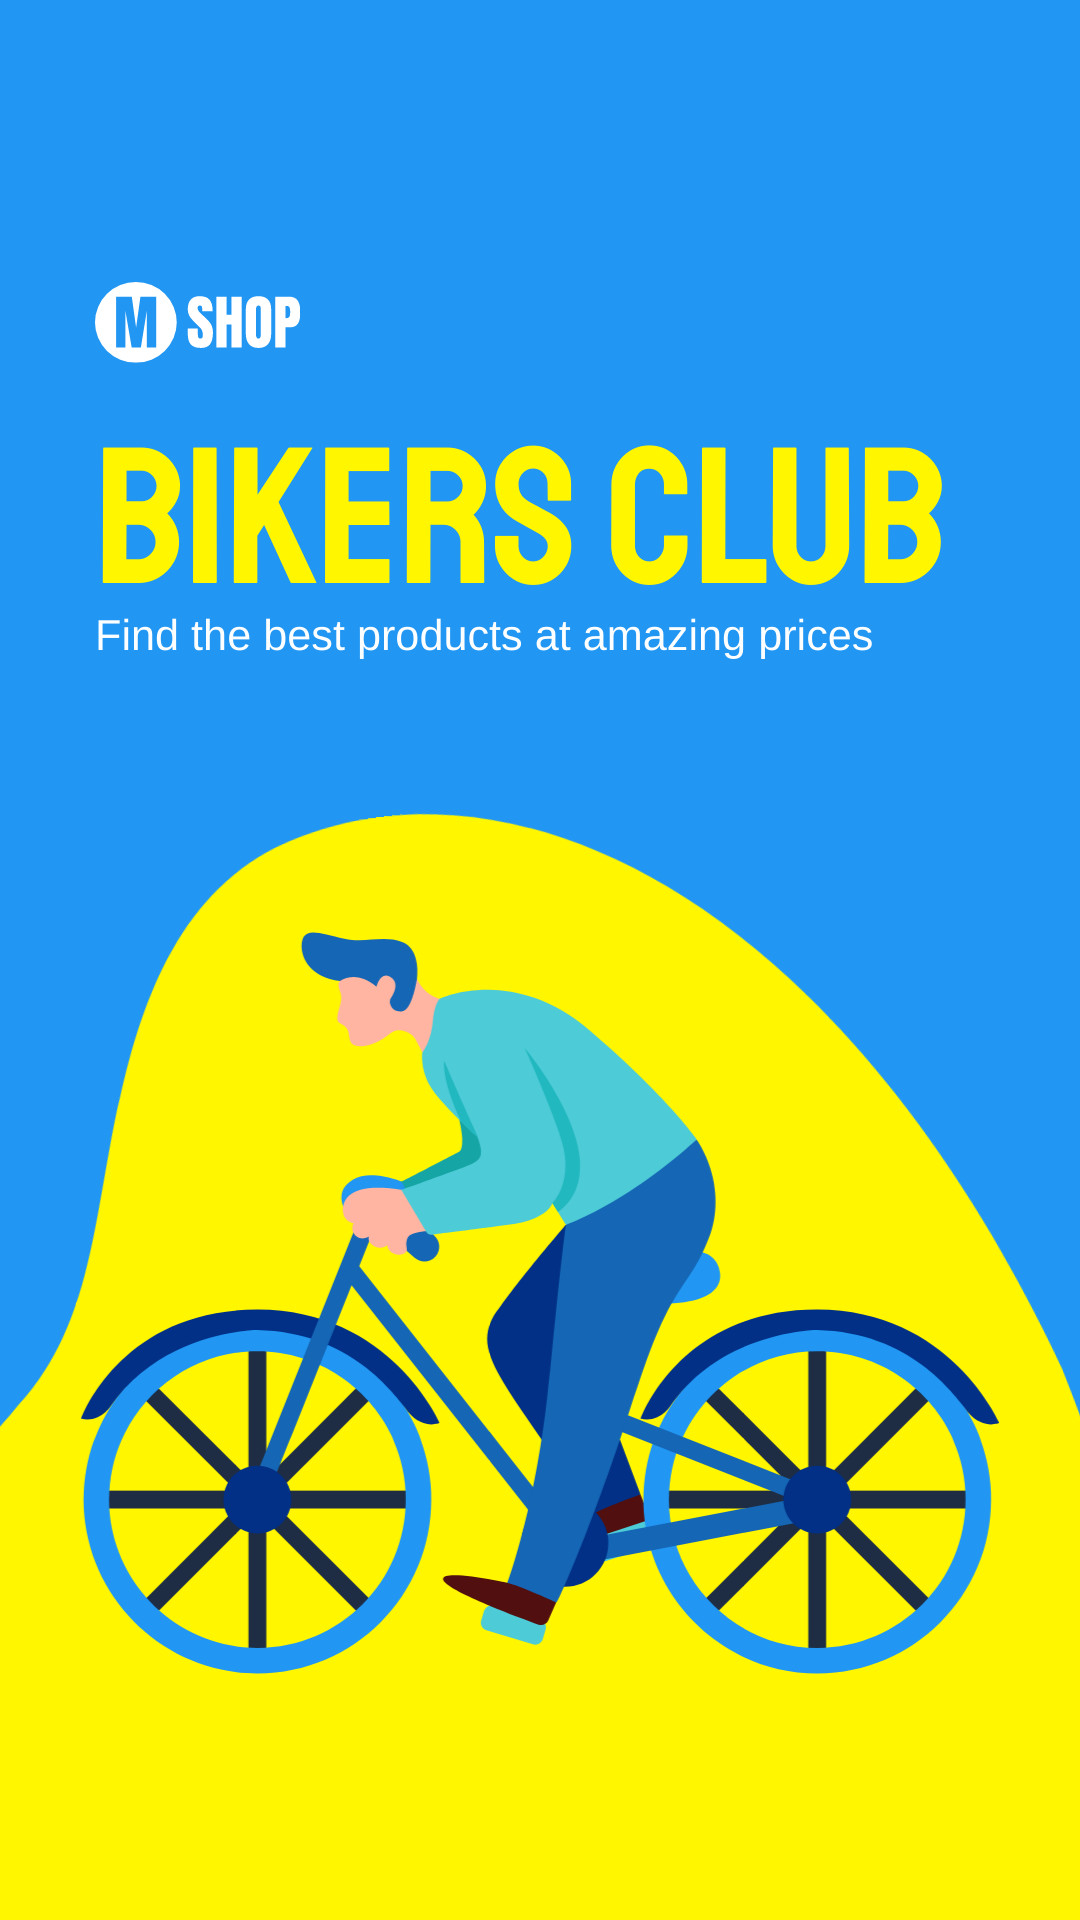 Bikers Club Products for Amazing Prices  Inline Rectangle 300x250